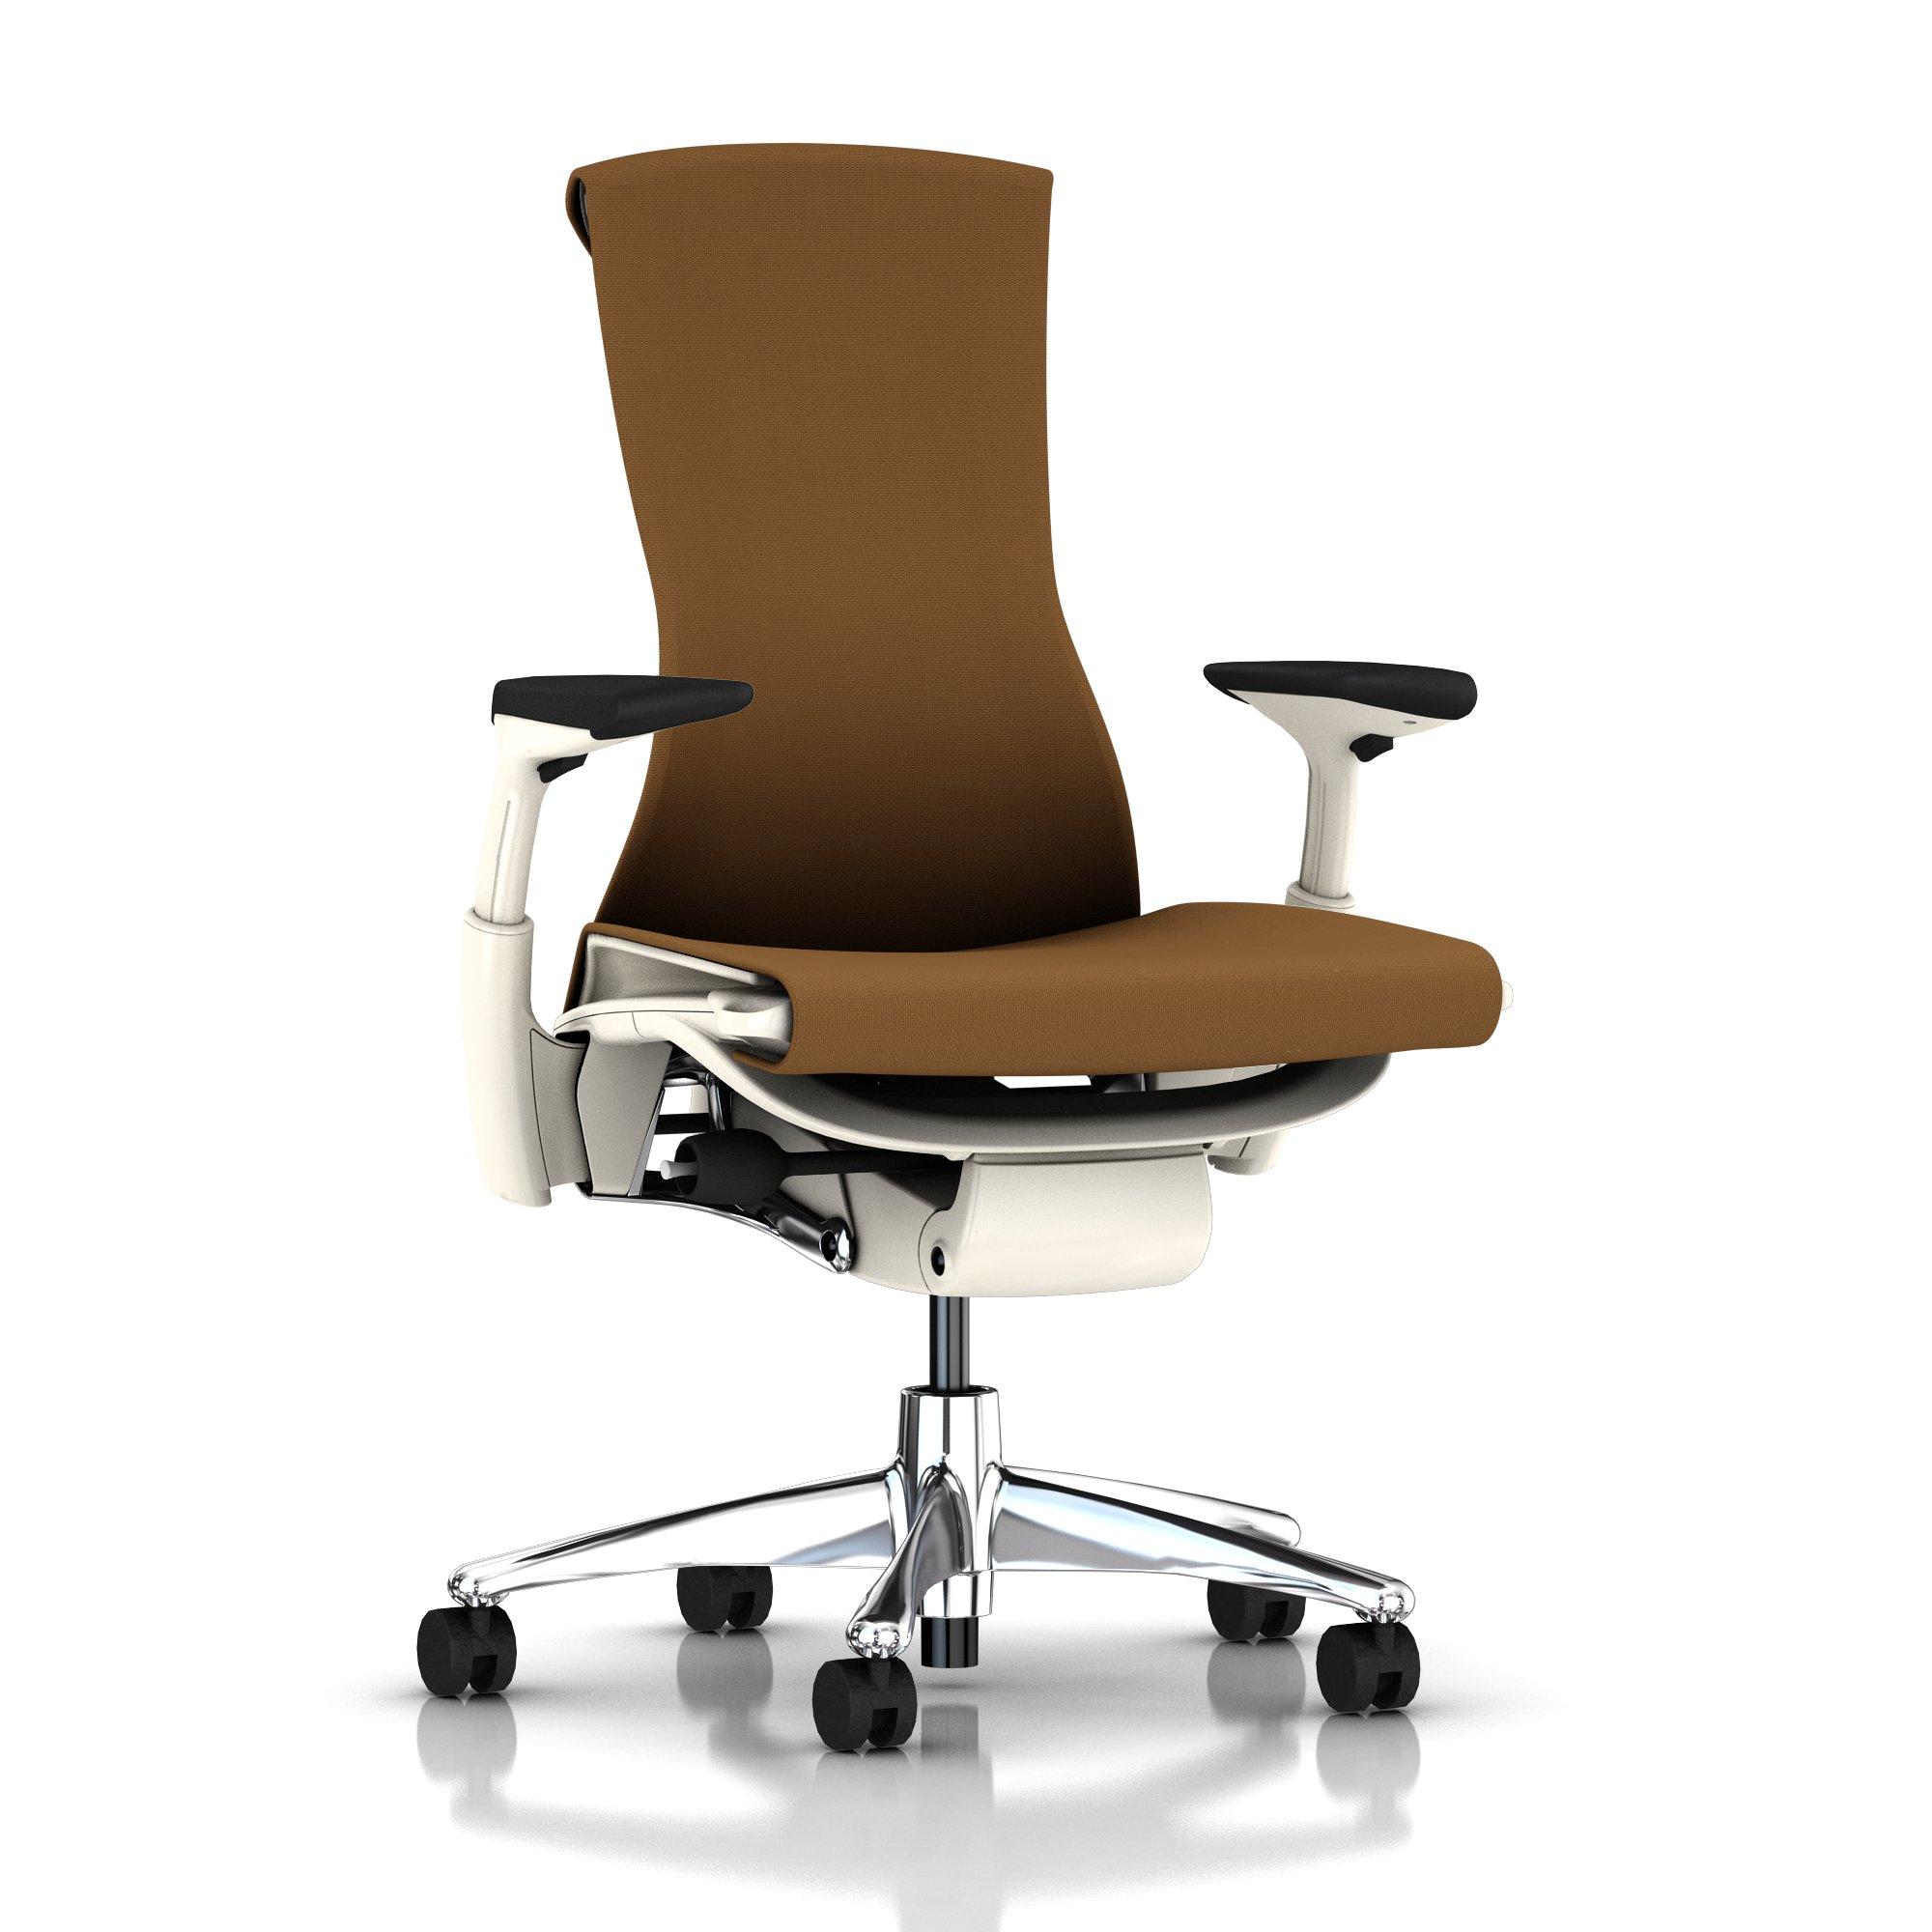 Embody Chair Molasses Rhythm with White Frame and Aluminum Base by Herman Miller